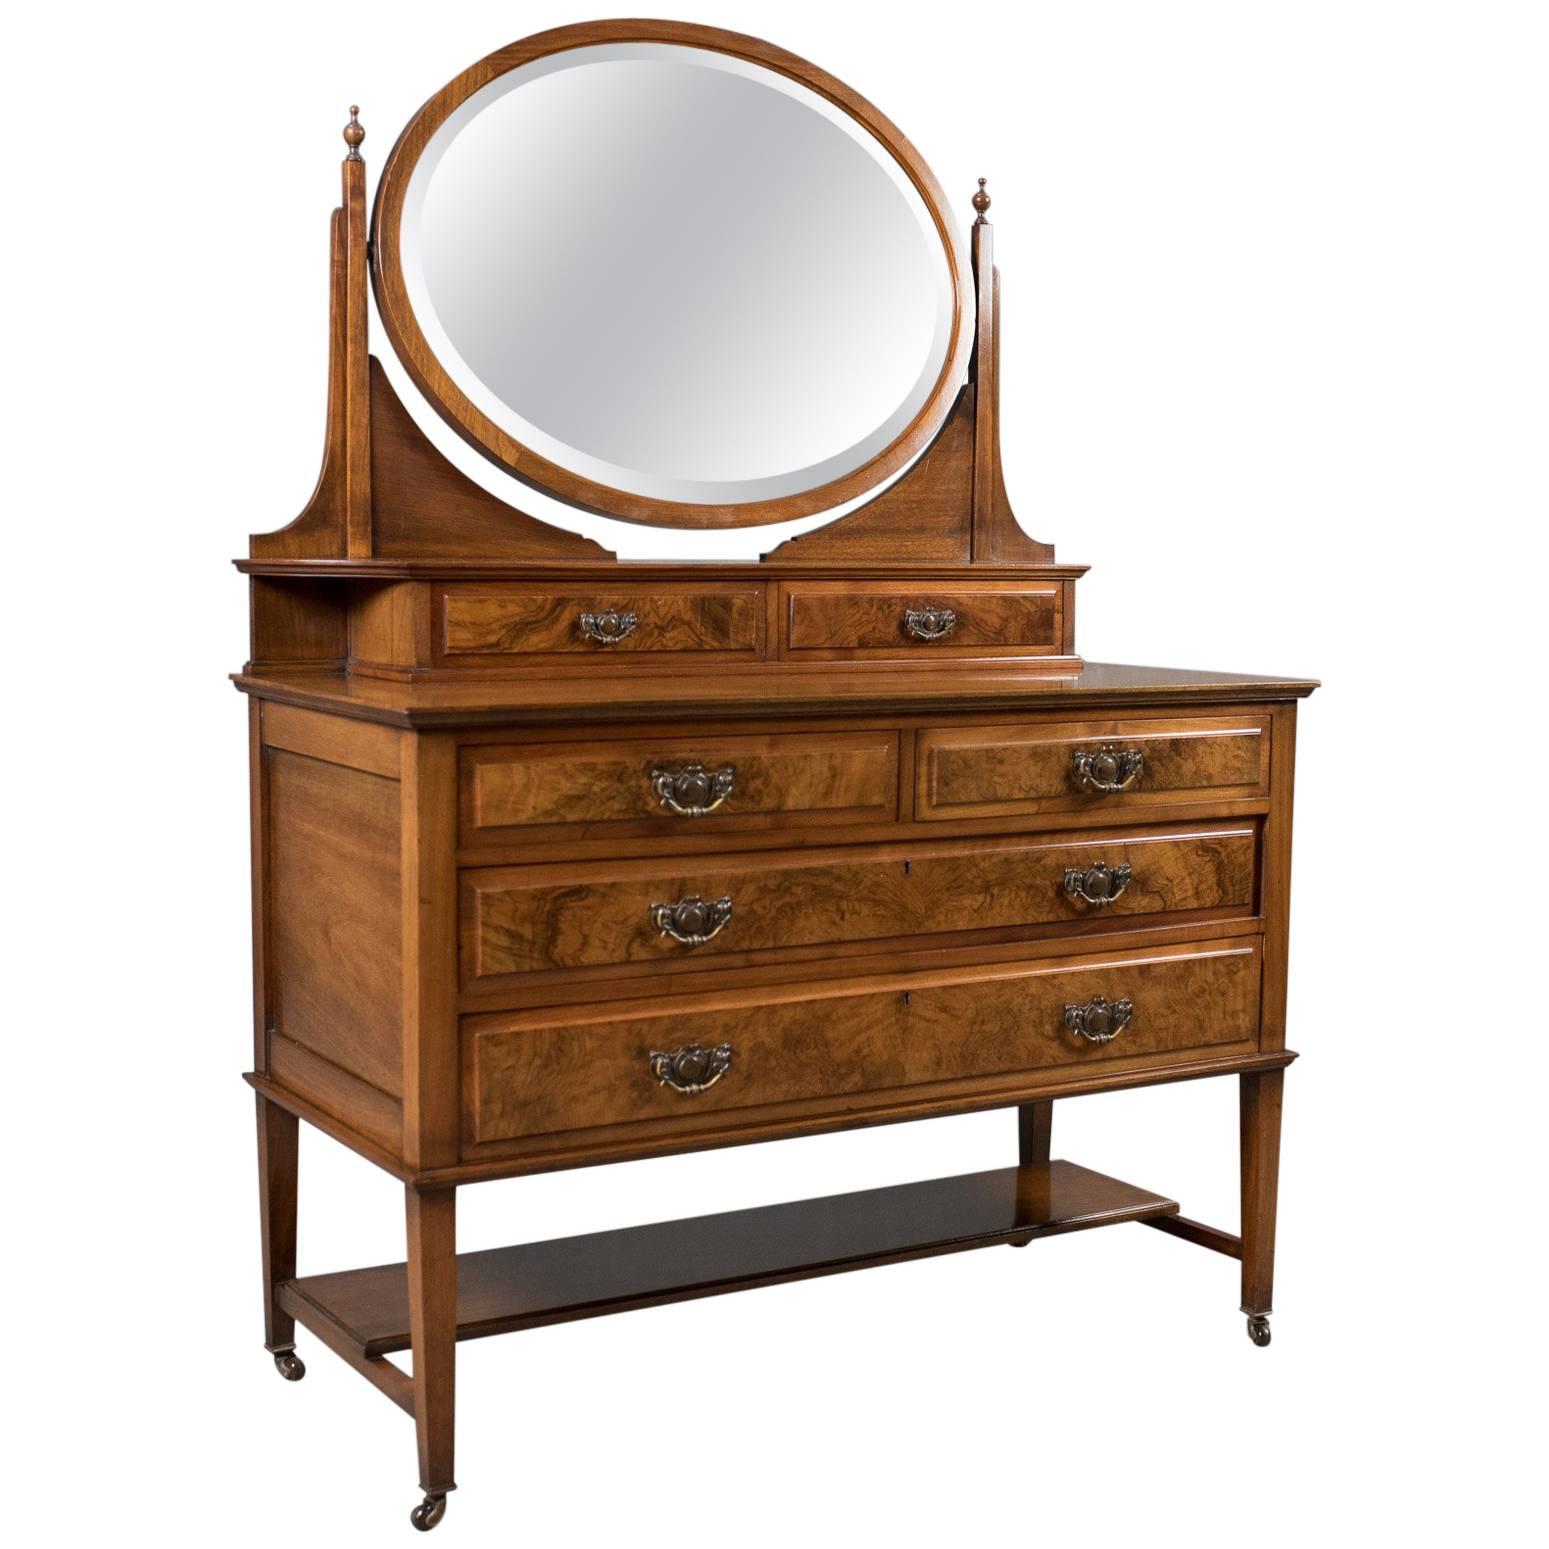 Antique Dressing Table, Edwardian Vanity Chest of Drawers, English, circa 1910